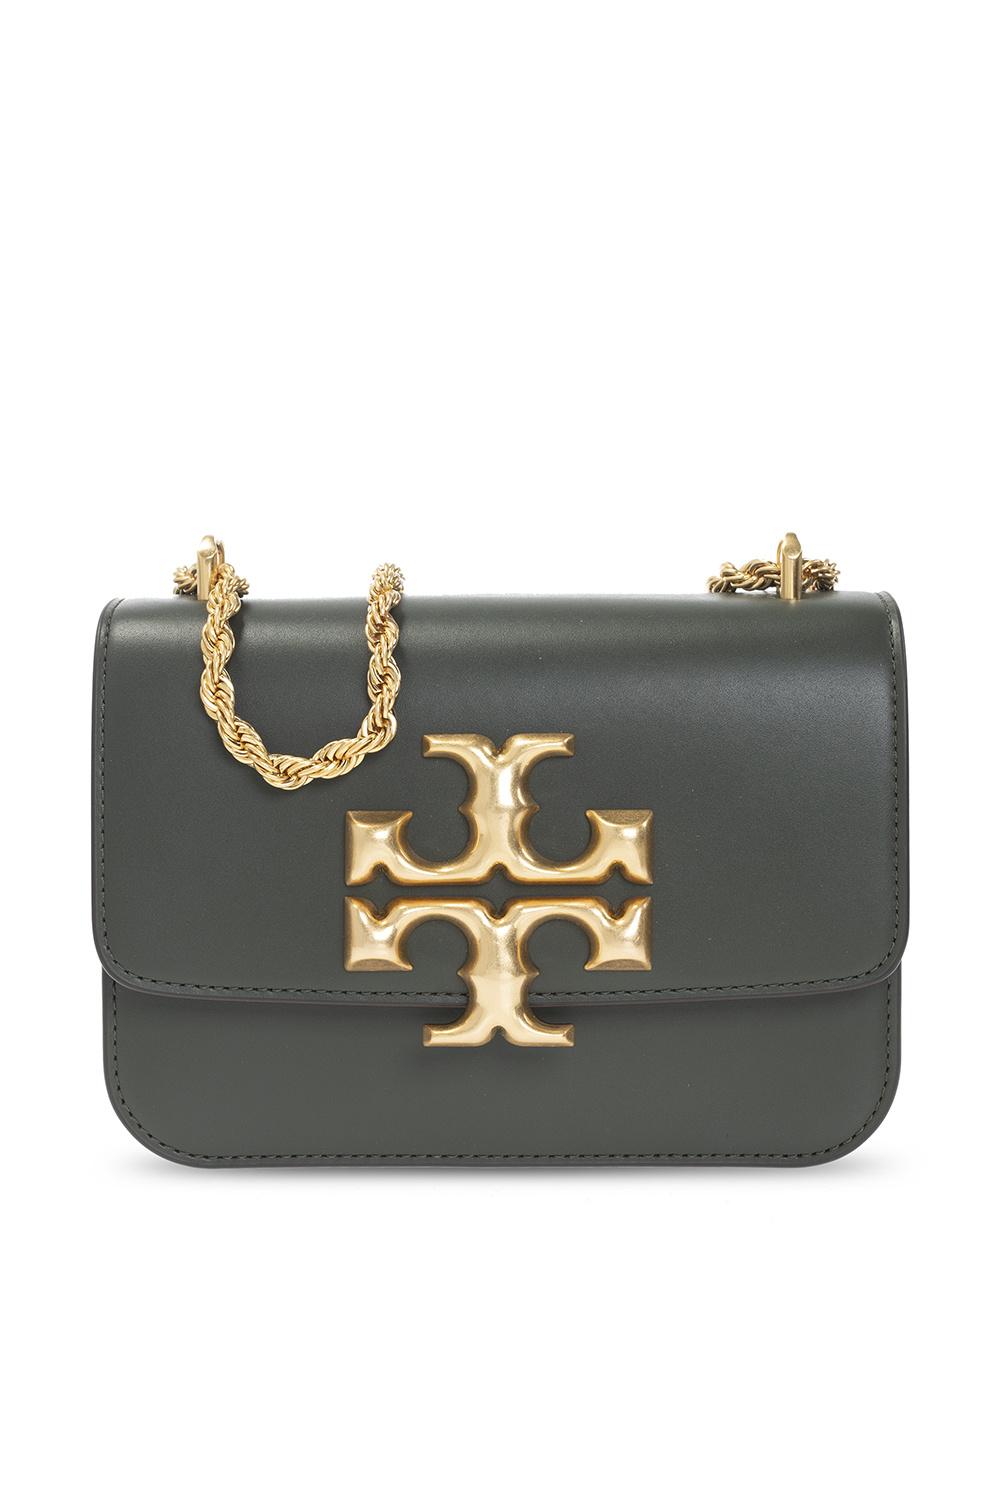 Tory Burch Eleanor Small Bag in Green | Lyst